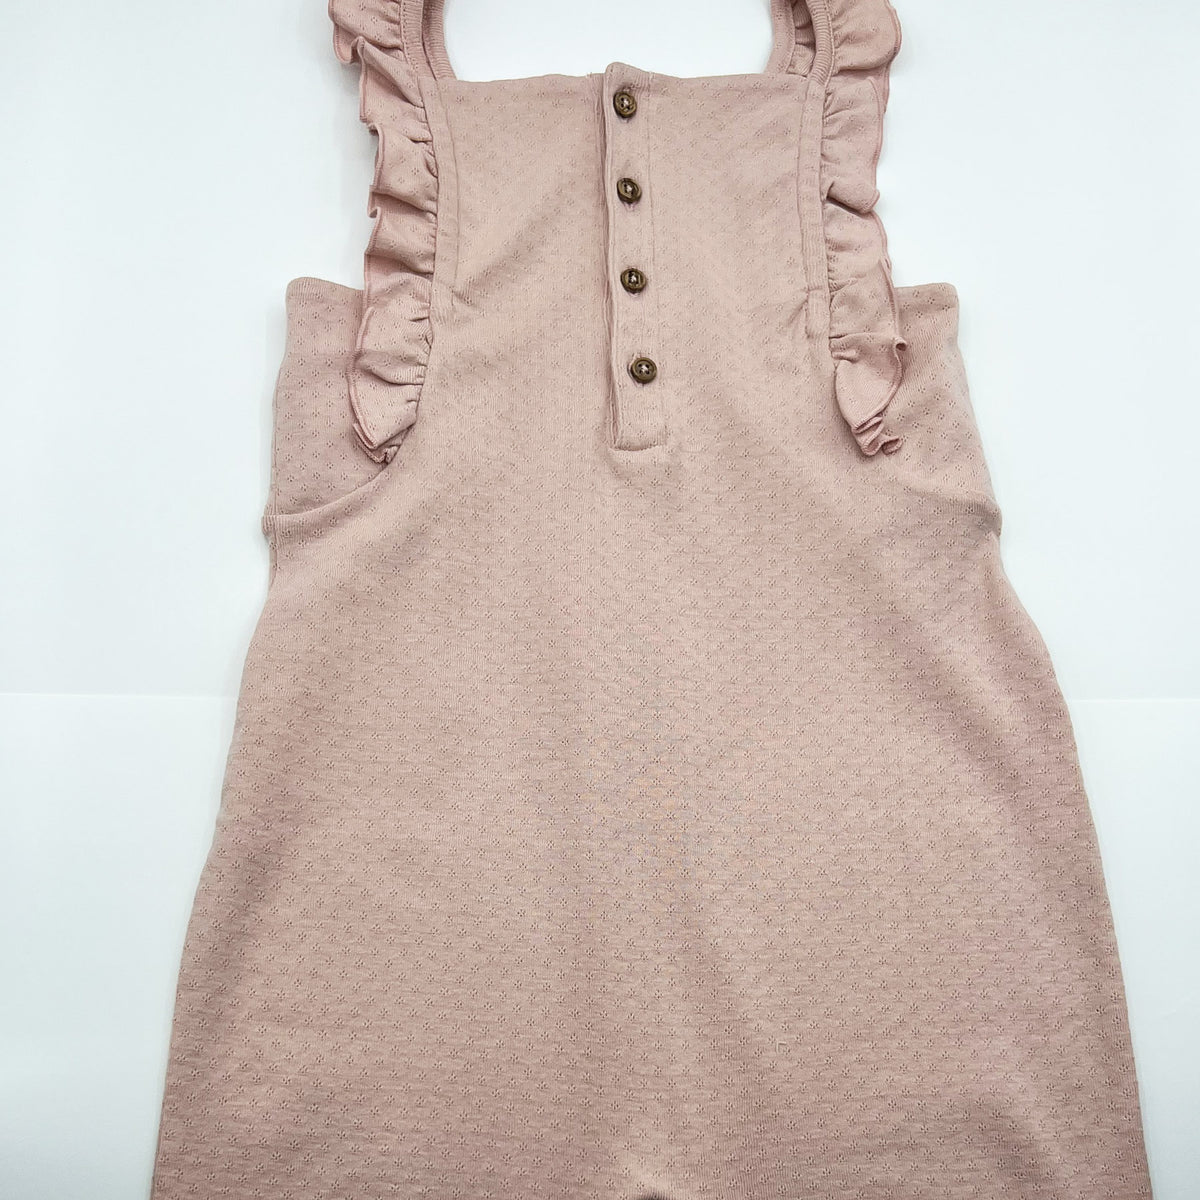 Pointelle Knit Overalls - From Marfa